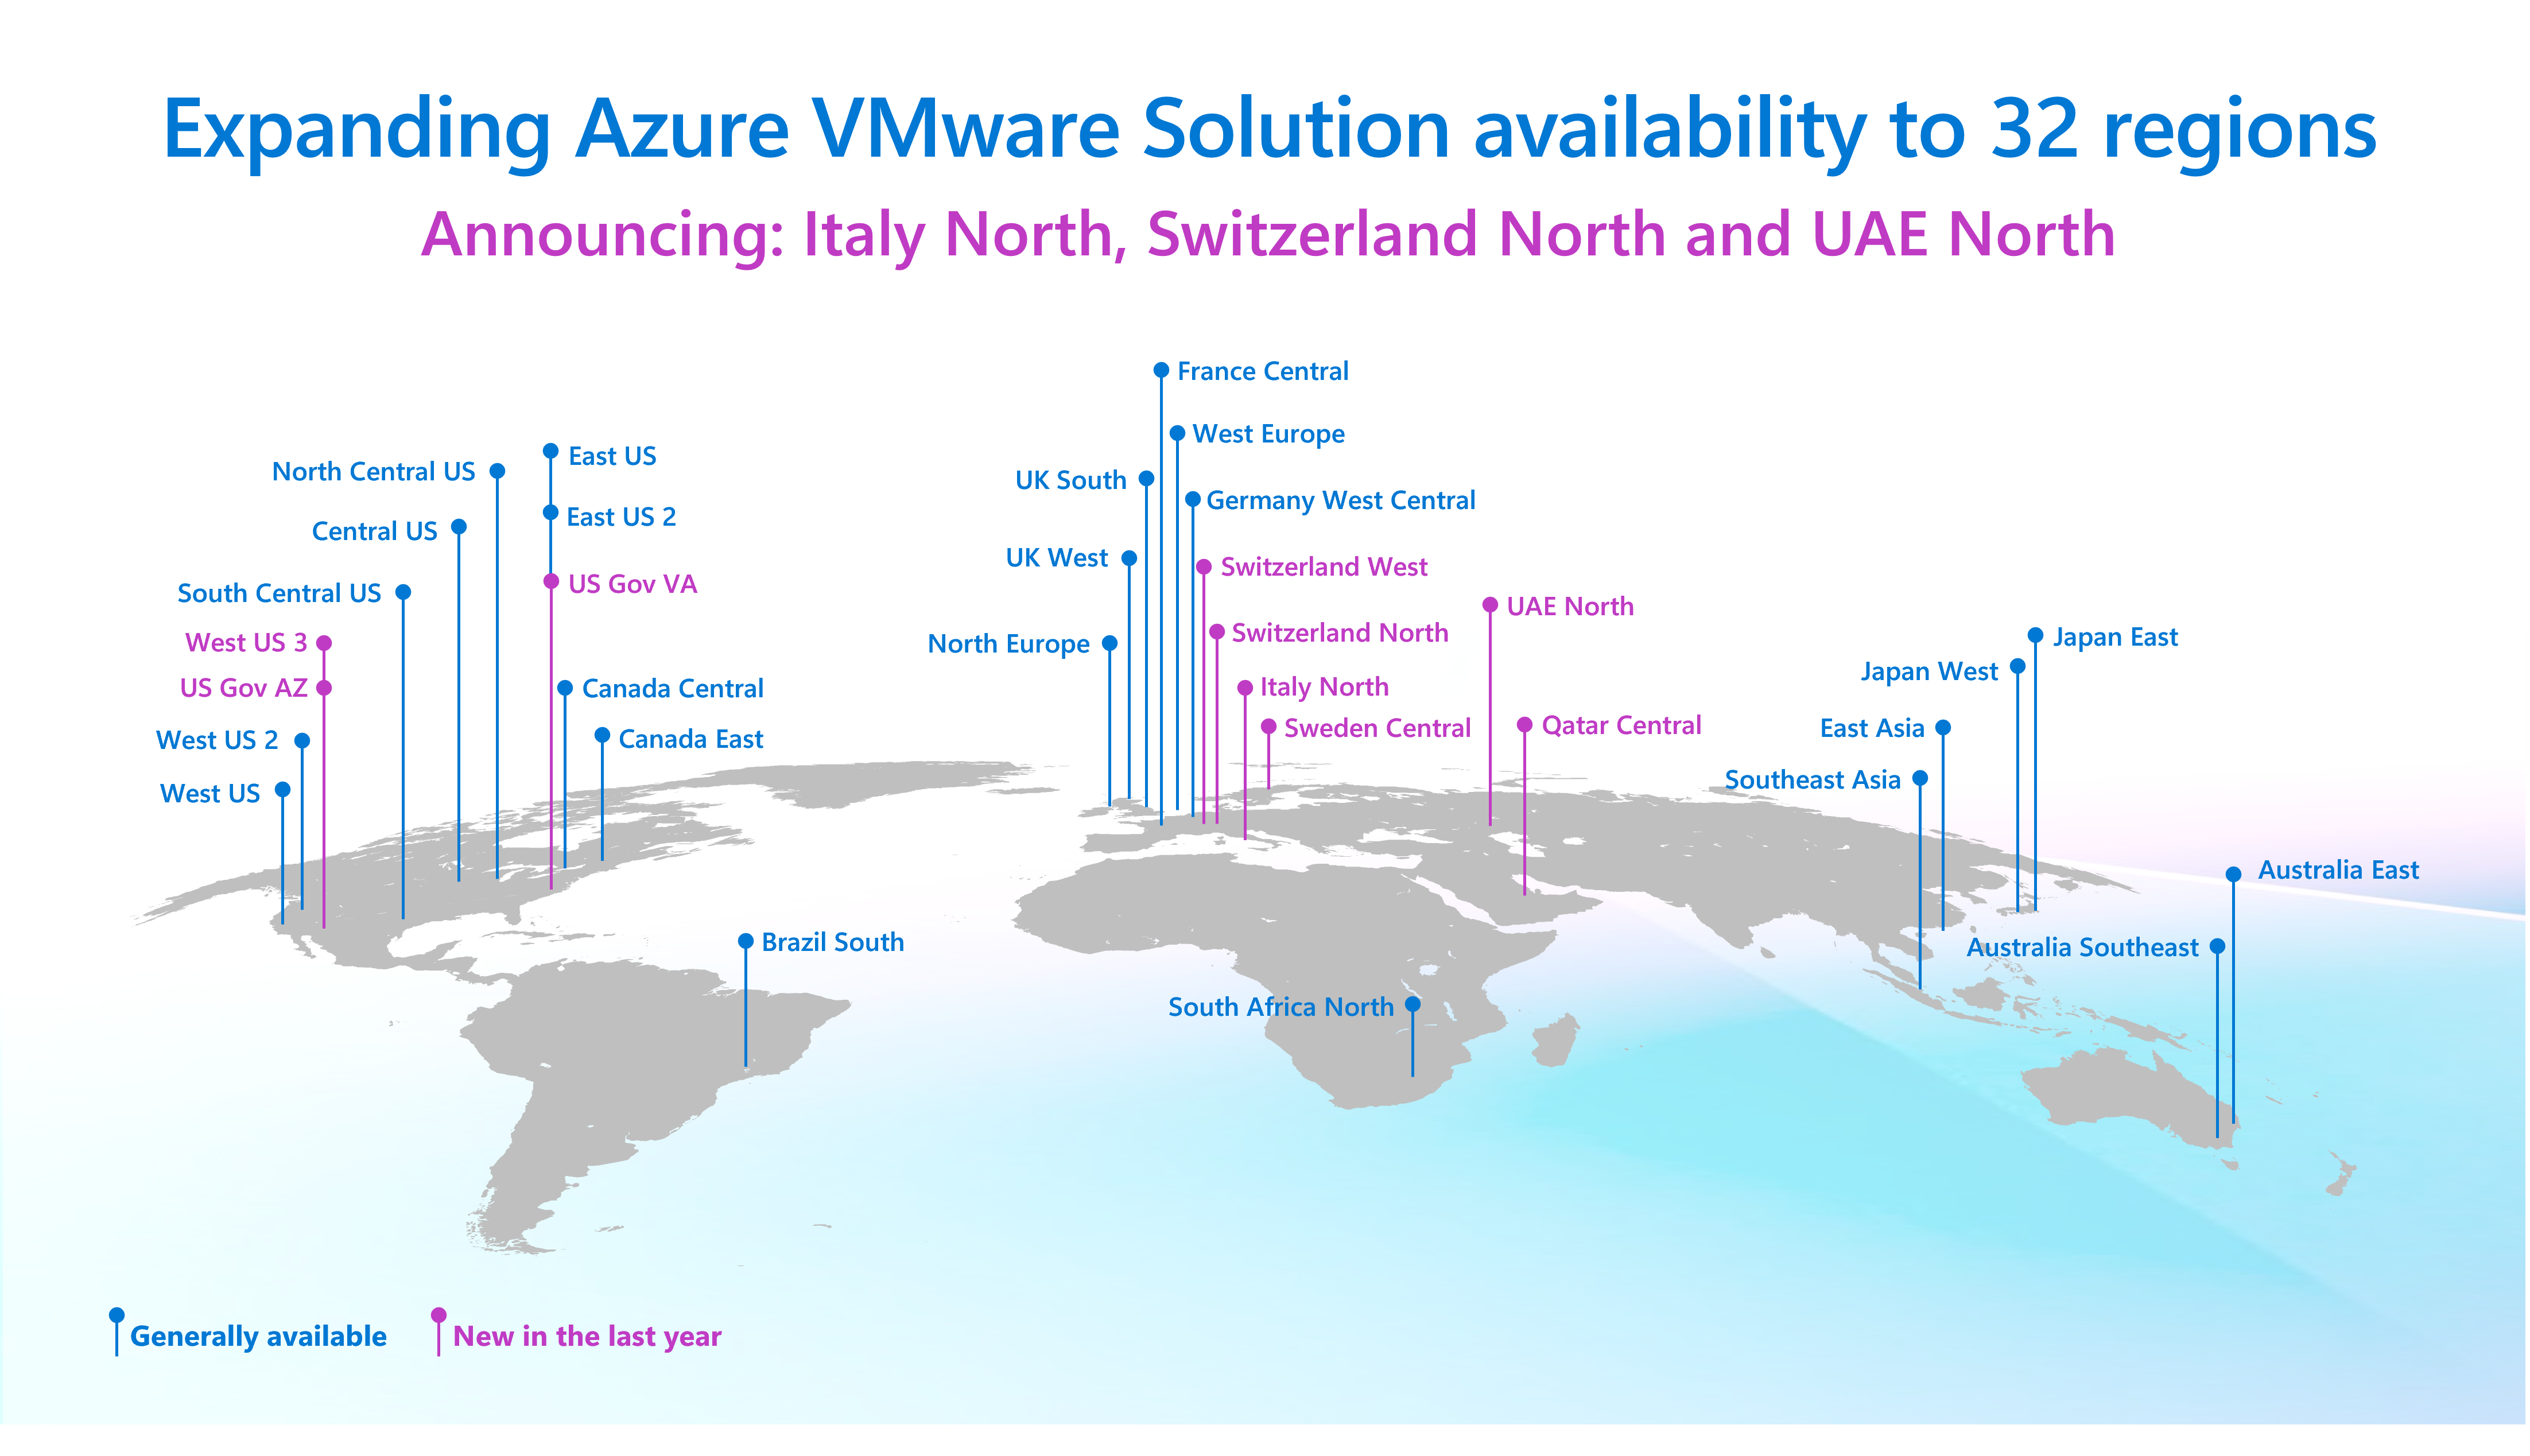 Azure VMware Solution now available in Italy North, Switzerland North and UAE North